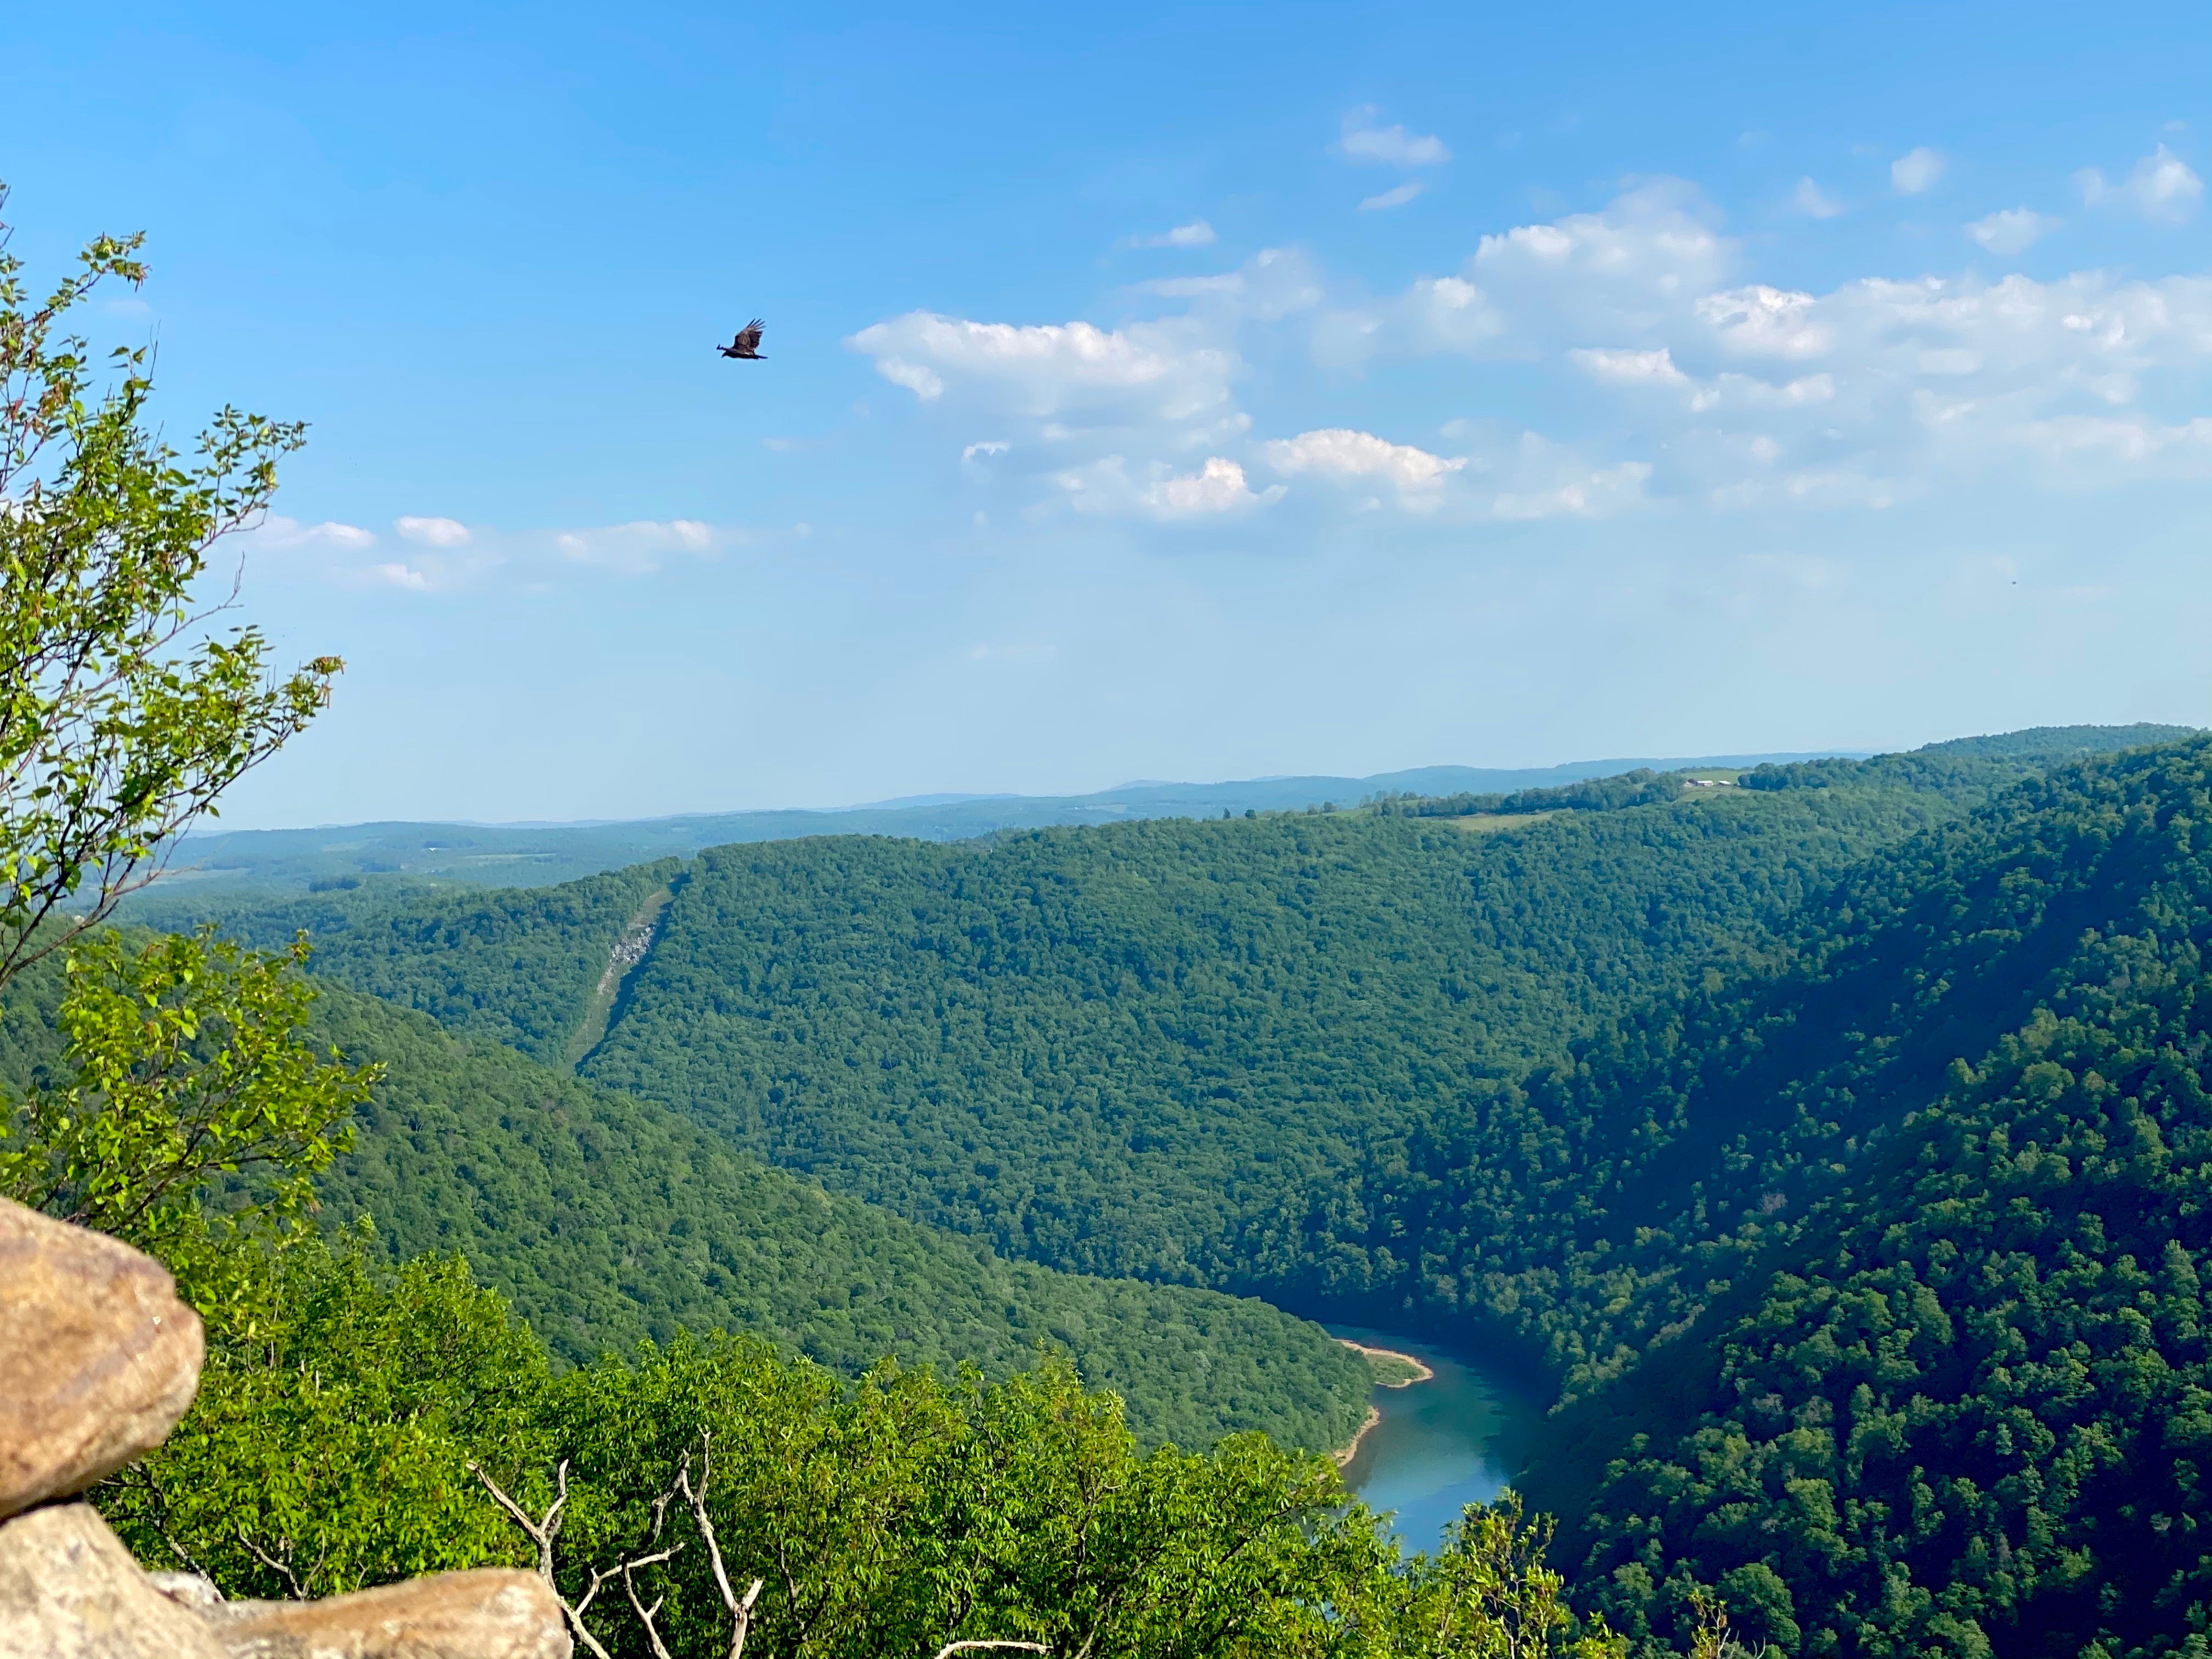 The view from an overlook at Coopers Rock State Forest just outside of Morgantown, West Virginia